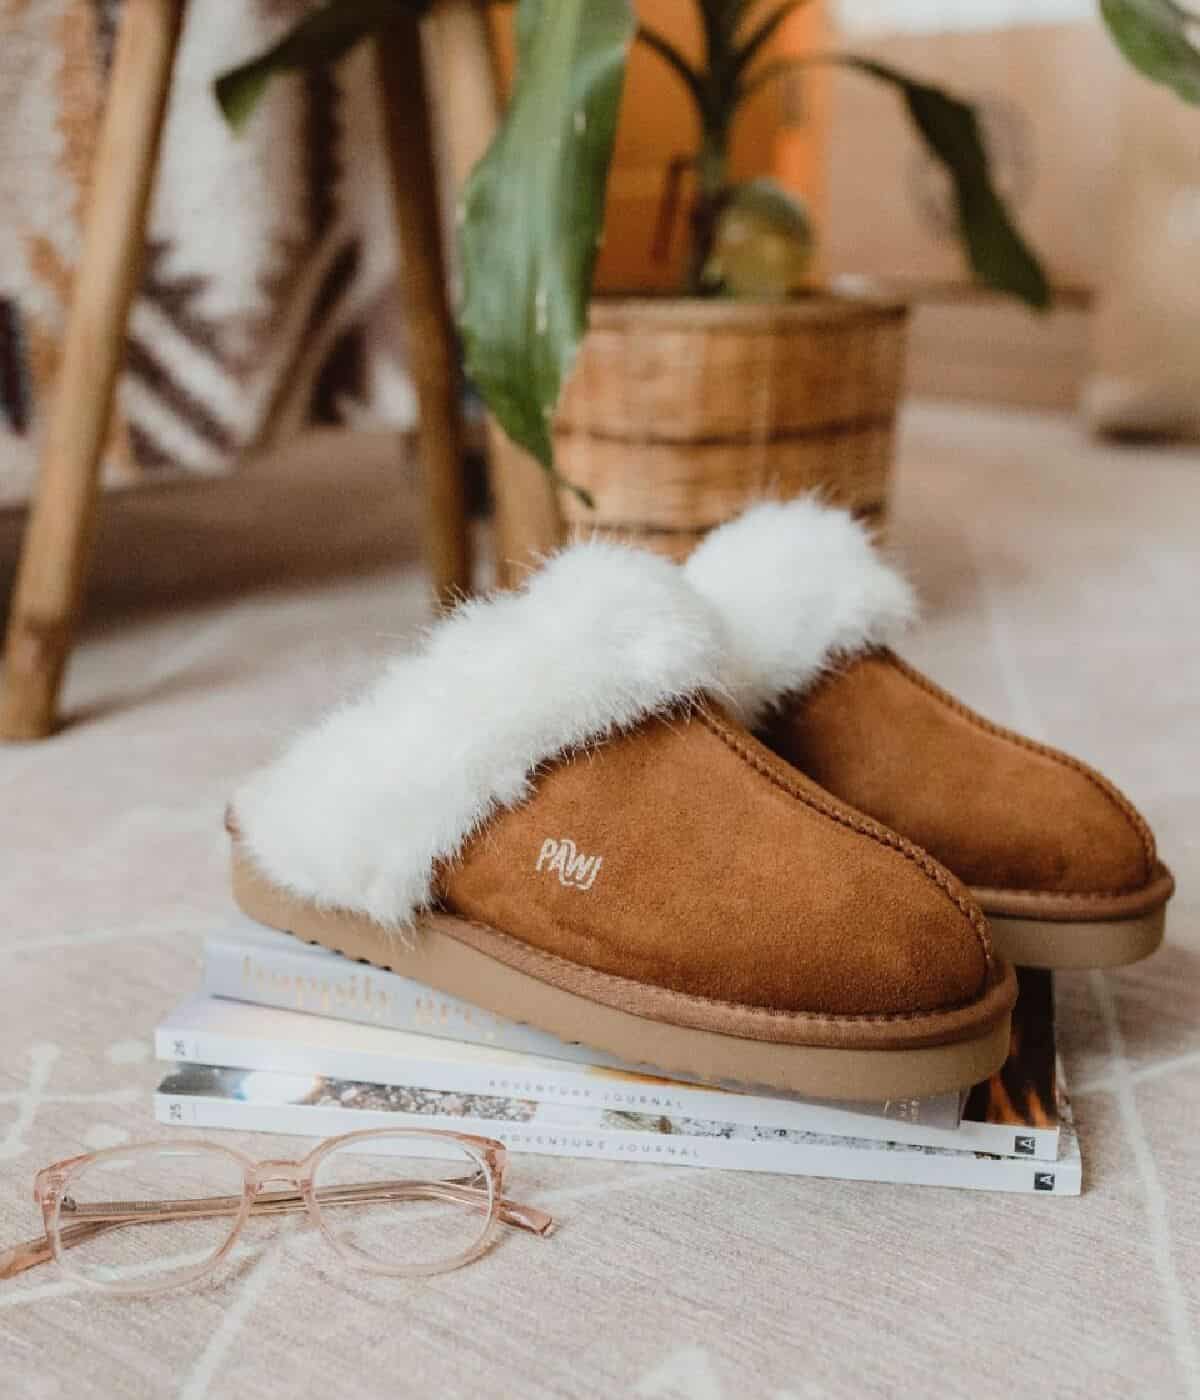 A pair of chestnut colored faux-fur lined slippers on top of a small pile of books next to a pair of pale pink eye glasses on the floor.